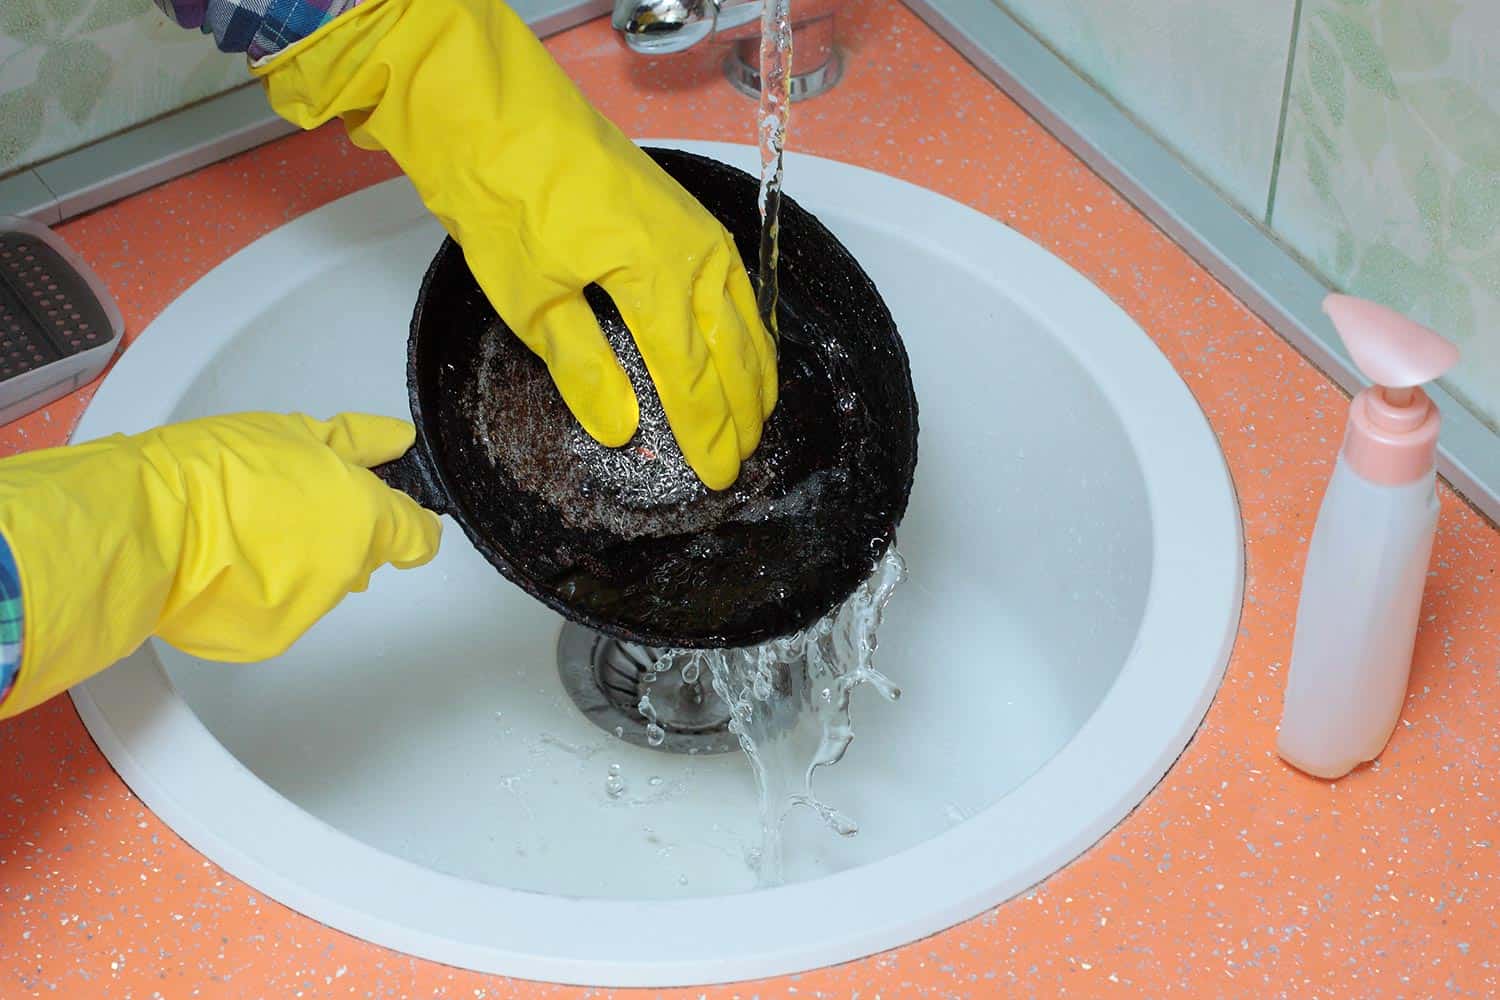 Person in yellow gloves washes an old black dirty cast iron pan under streaming water